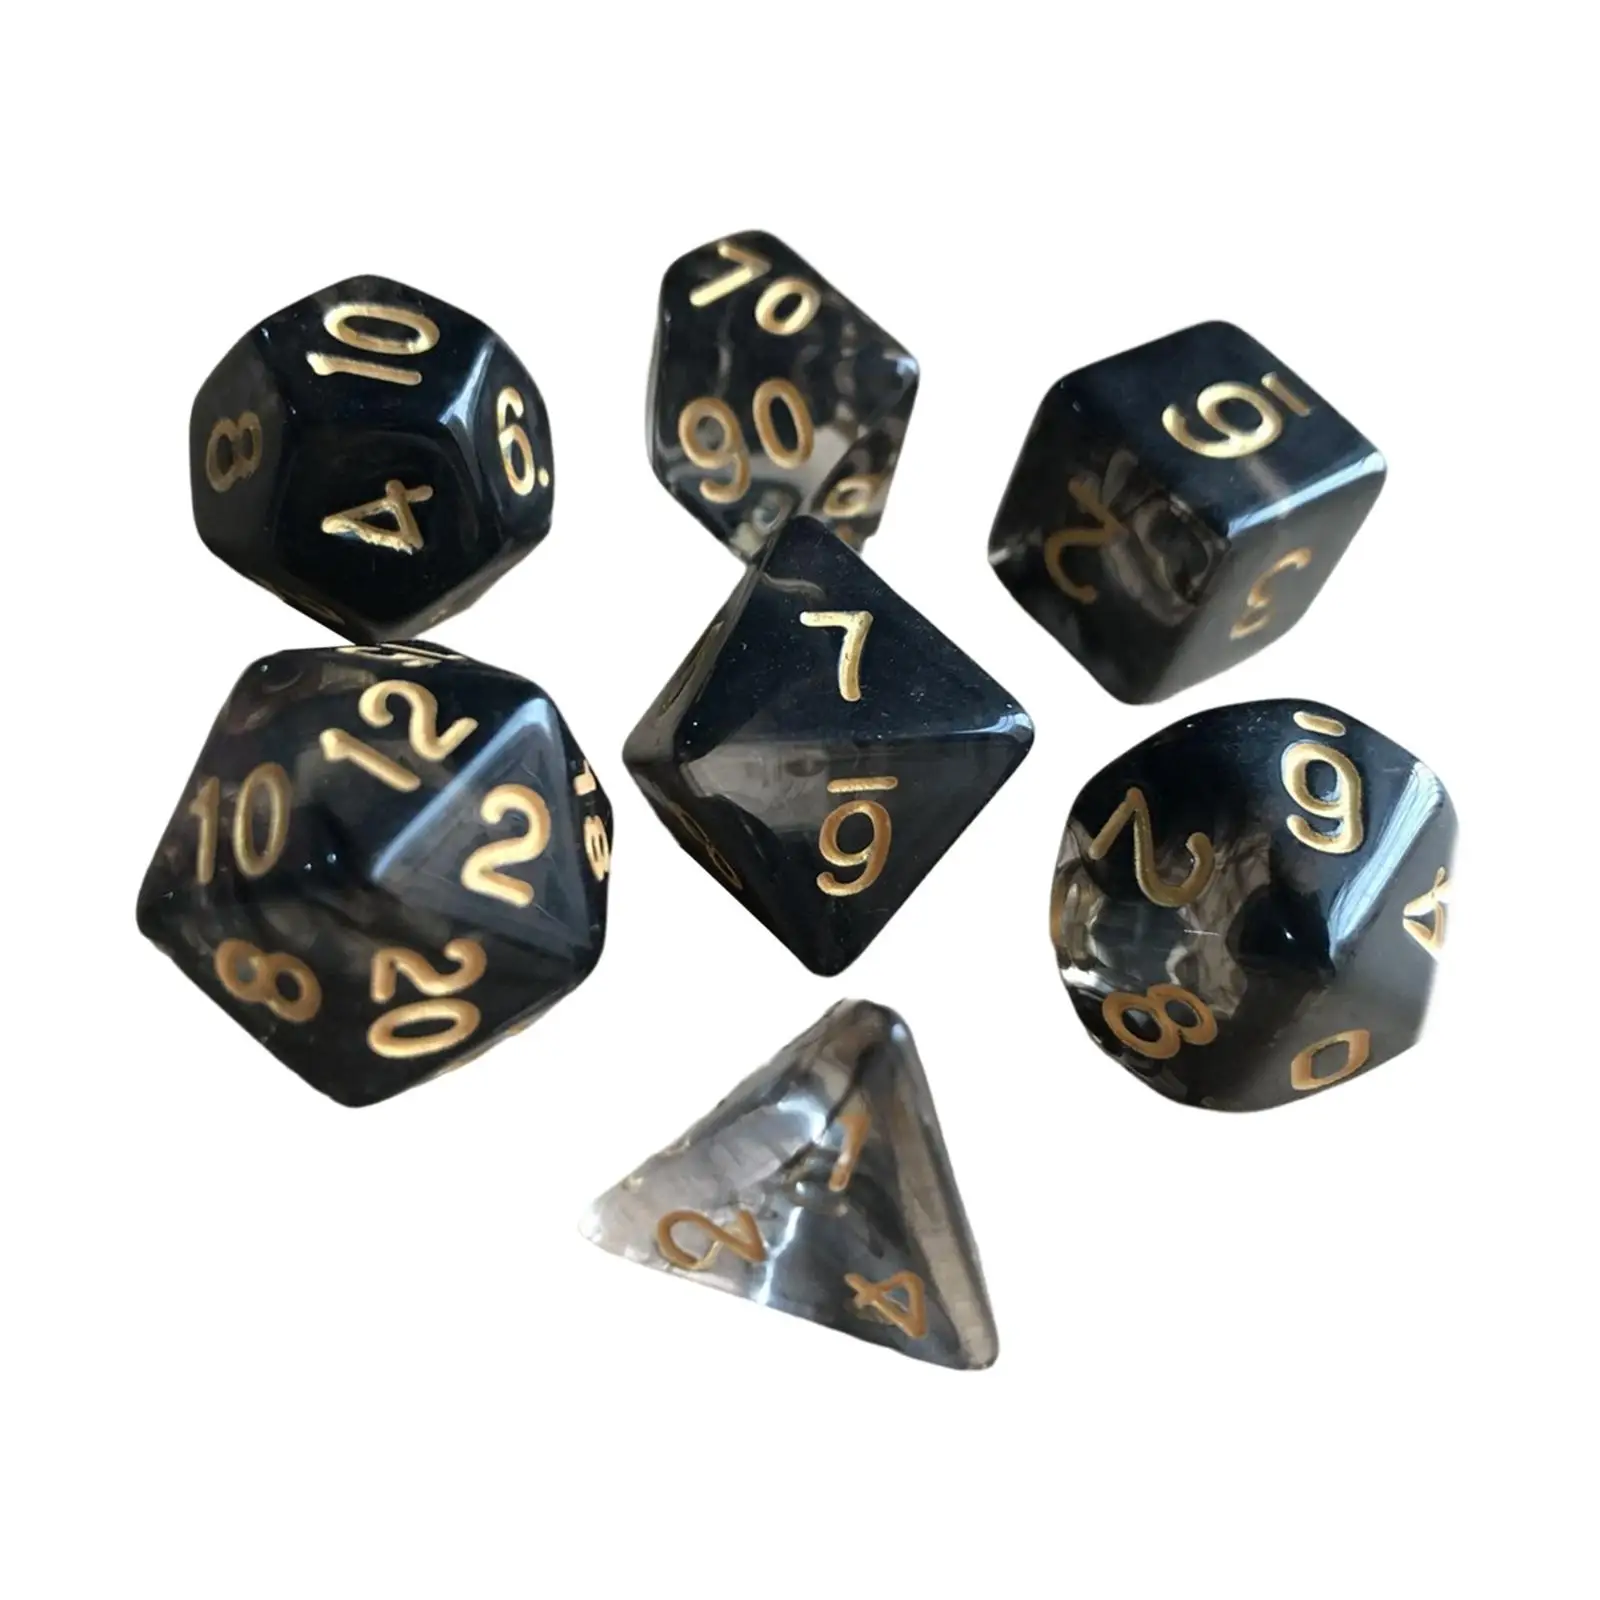 7x Acrylic Polyhedral Dice D4-D20 Family Table Game for Family Gathering Bar